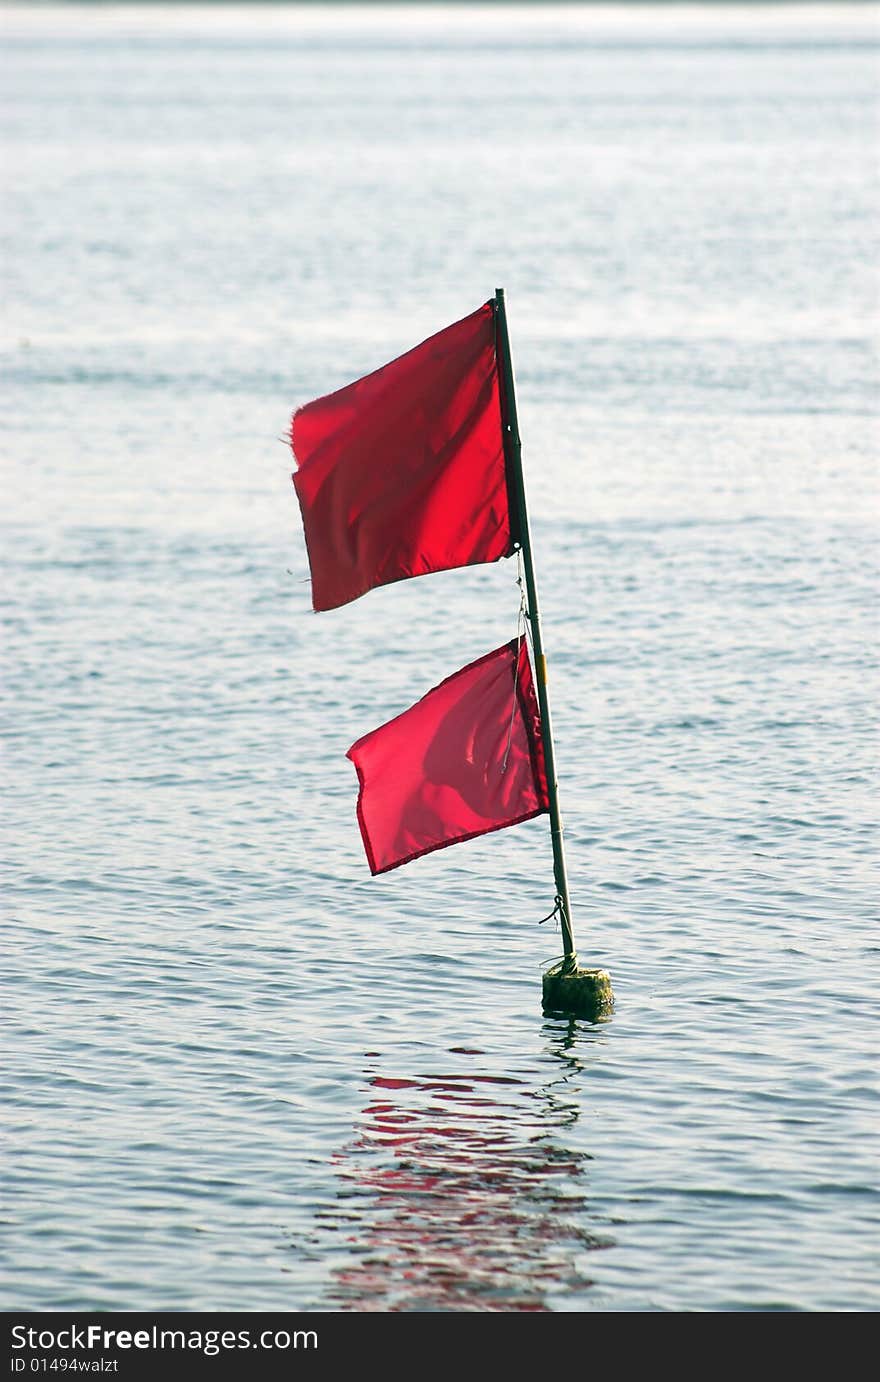 Fishing Net Flag. Red flag in the sea marking fishing net at the ocean floor.